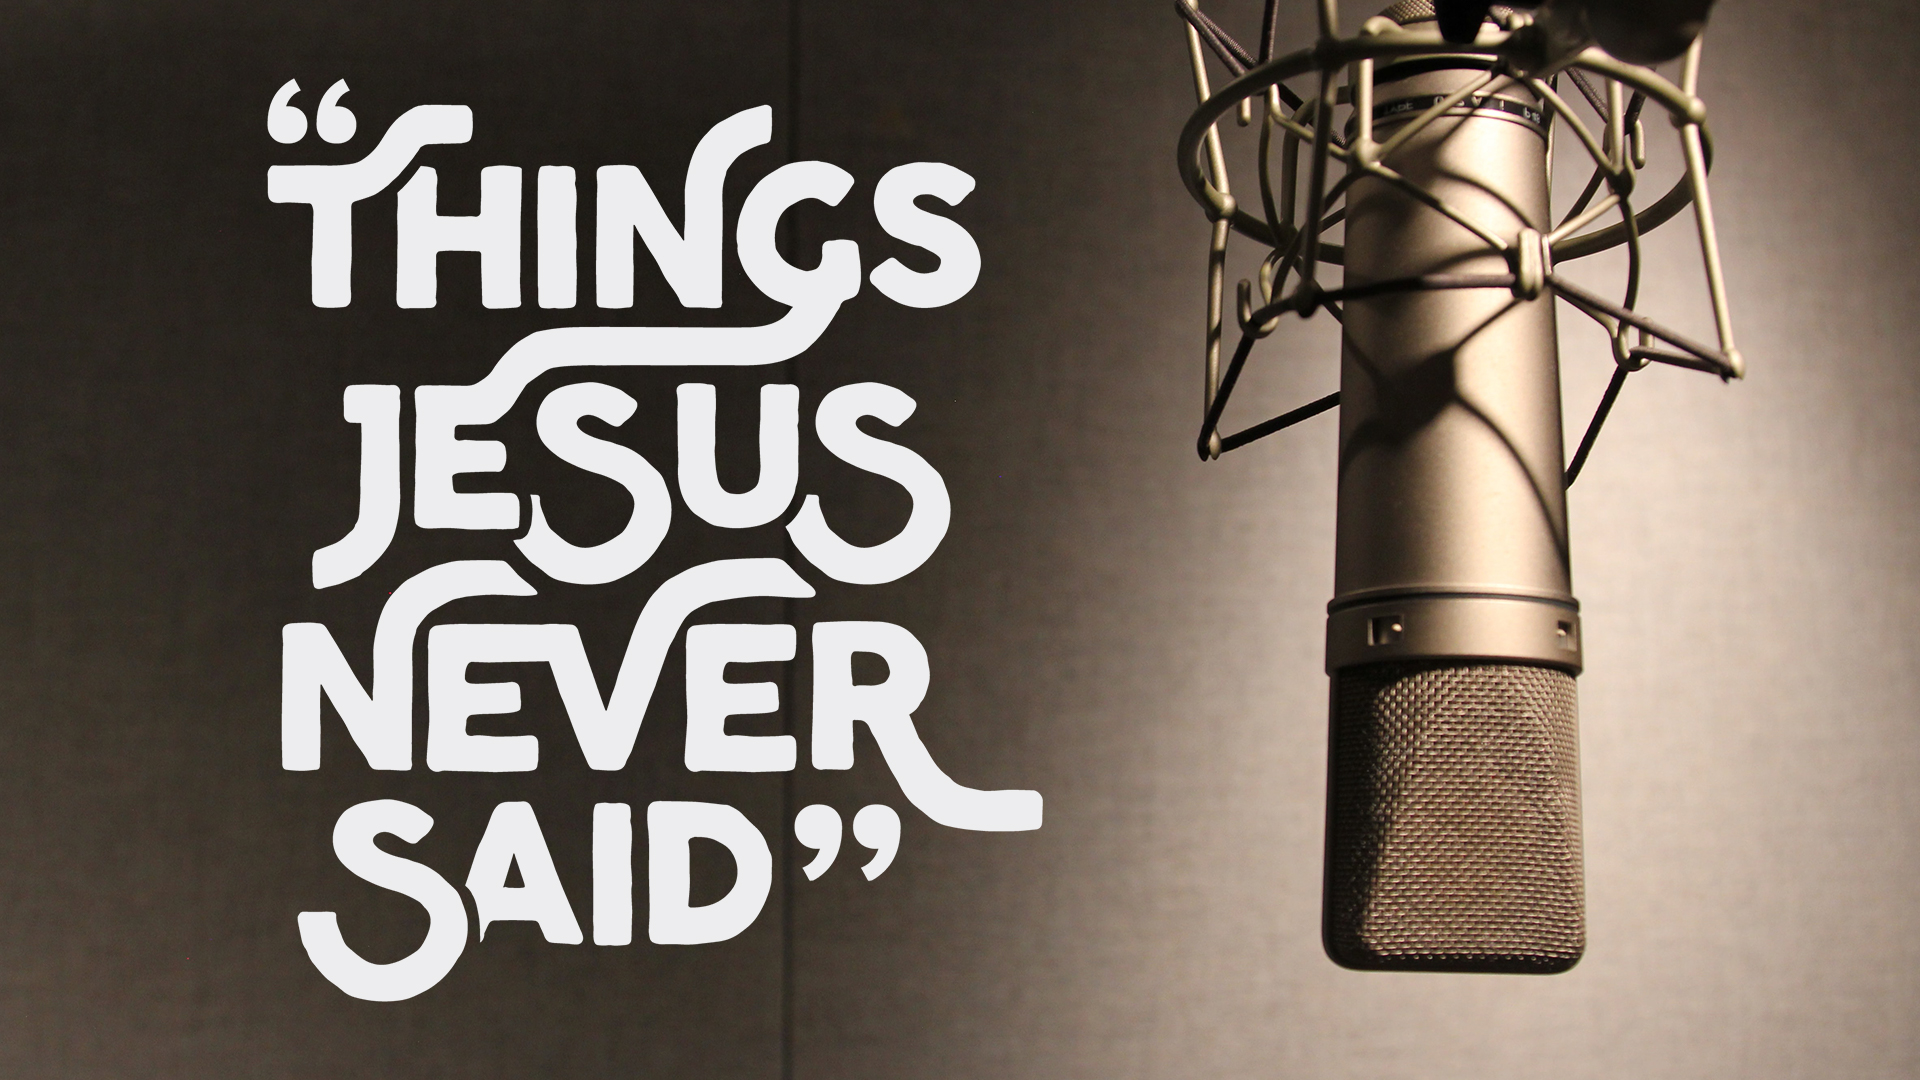 Jesus Never Said: "It can't be wrong if nobody's getting hurt."